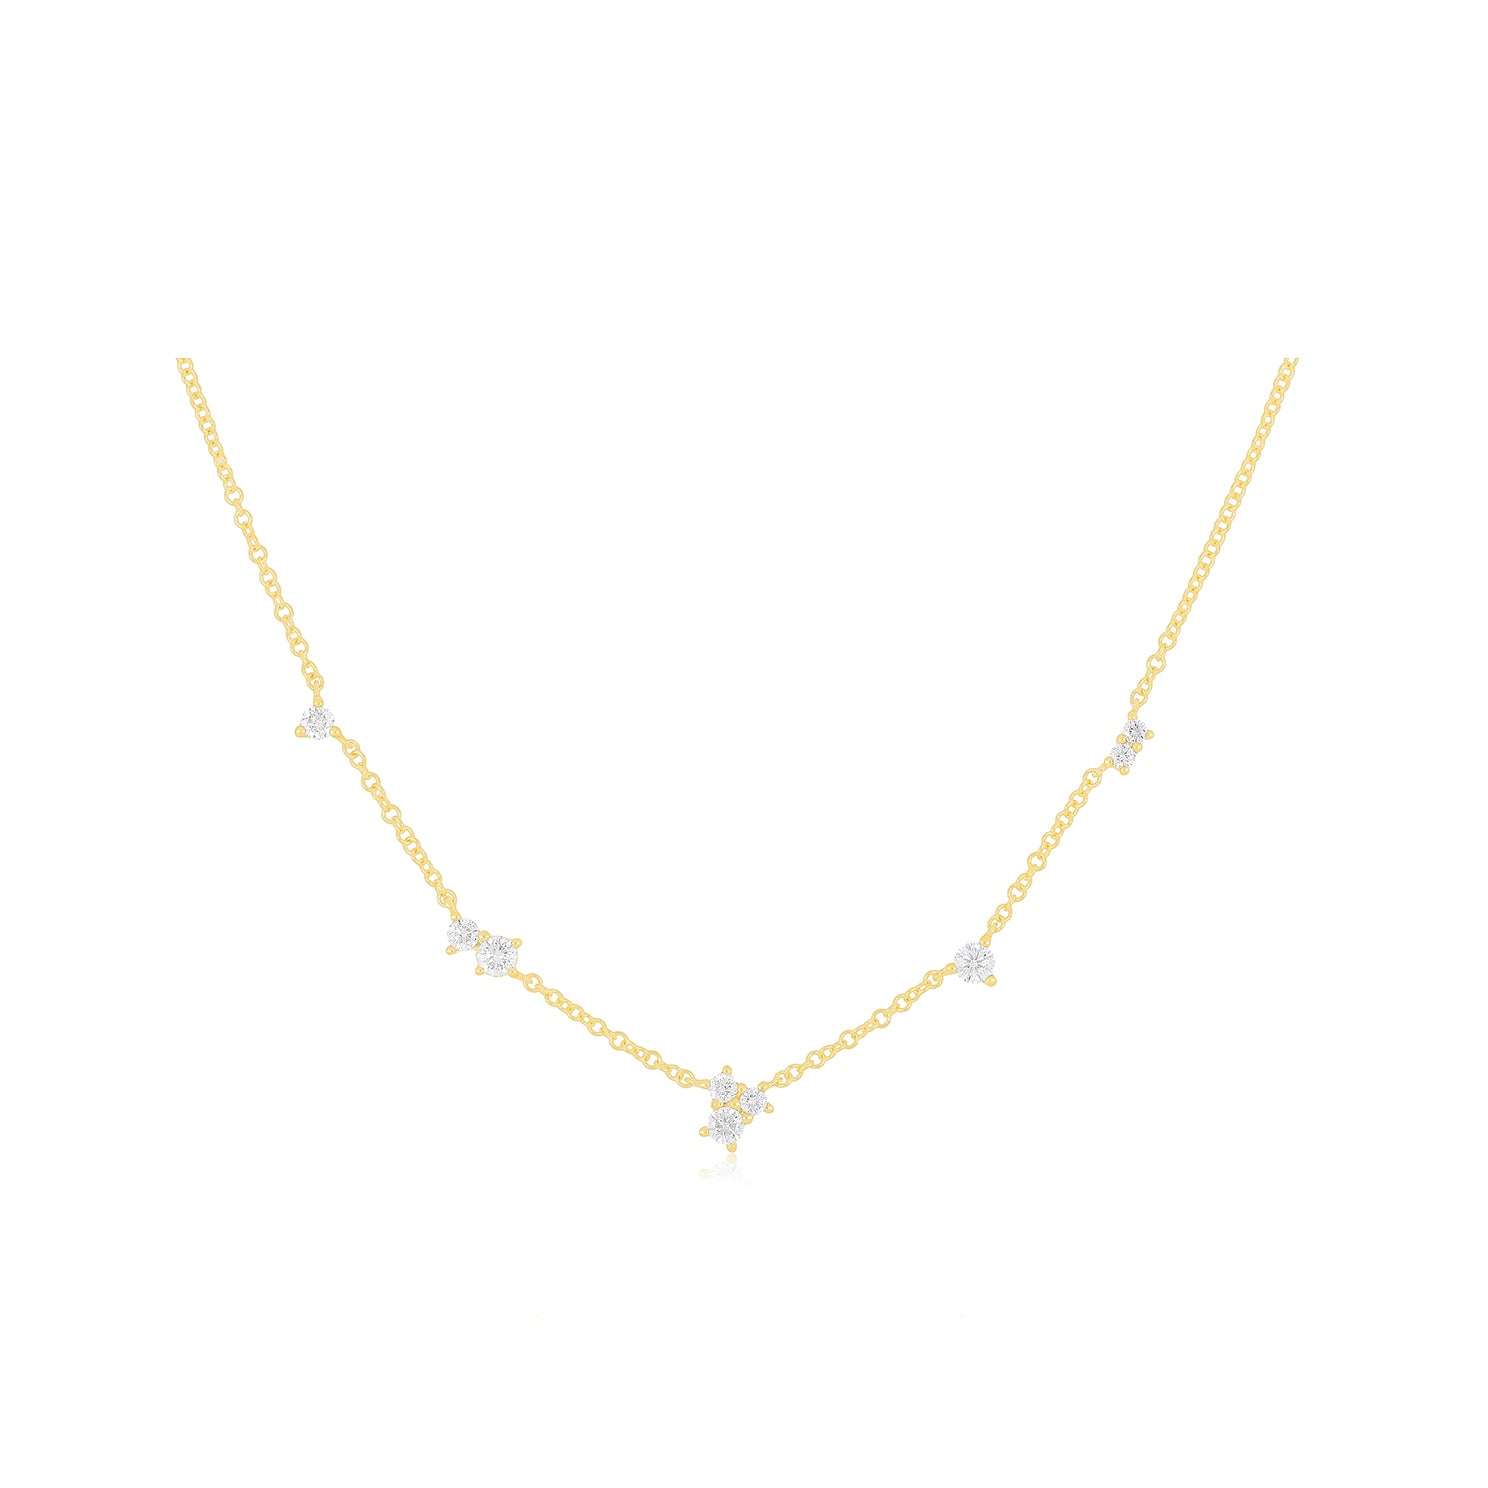 Multi Diamond Cluster Necklace in 14k yellow gold